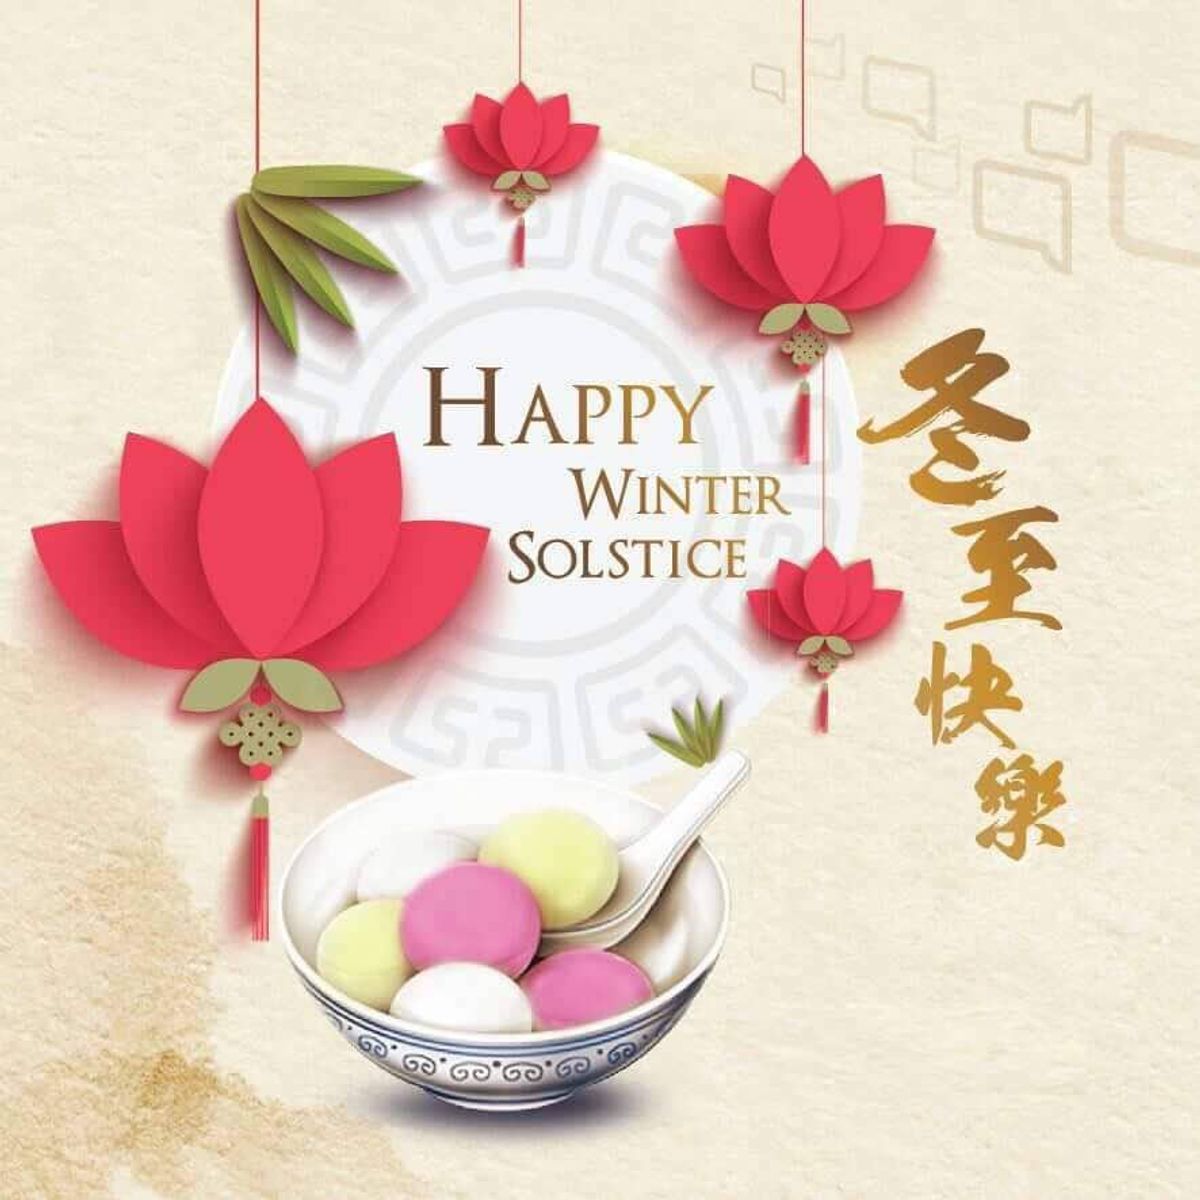 HAPPY WINTER SOLSTICE Satchman Shop Malaysia's 1 Online Store for